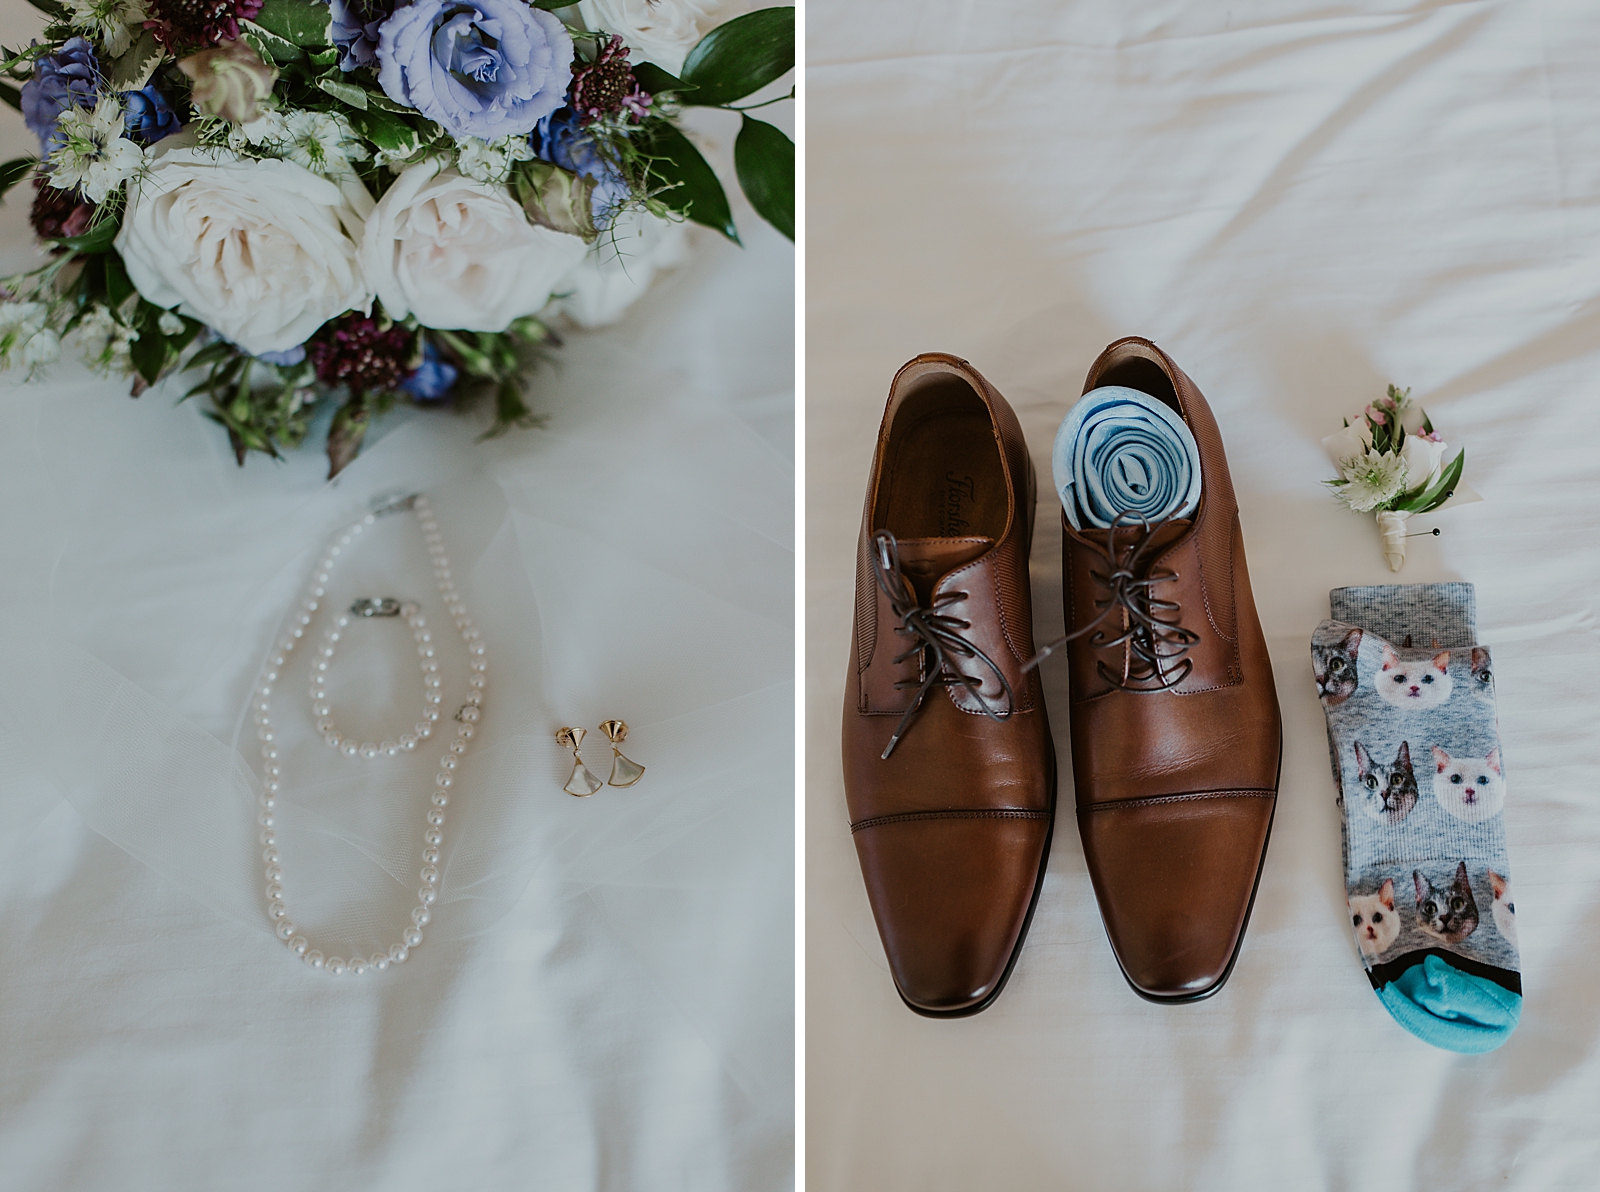 Detail shot of Bride jewelry and Groom's shoes and socks